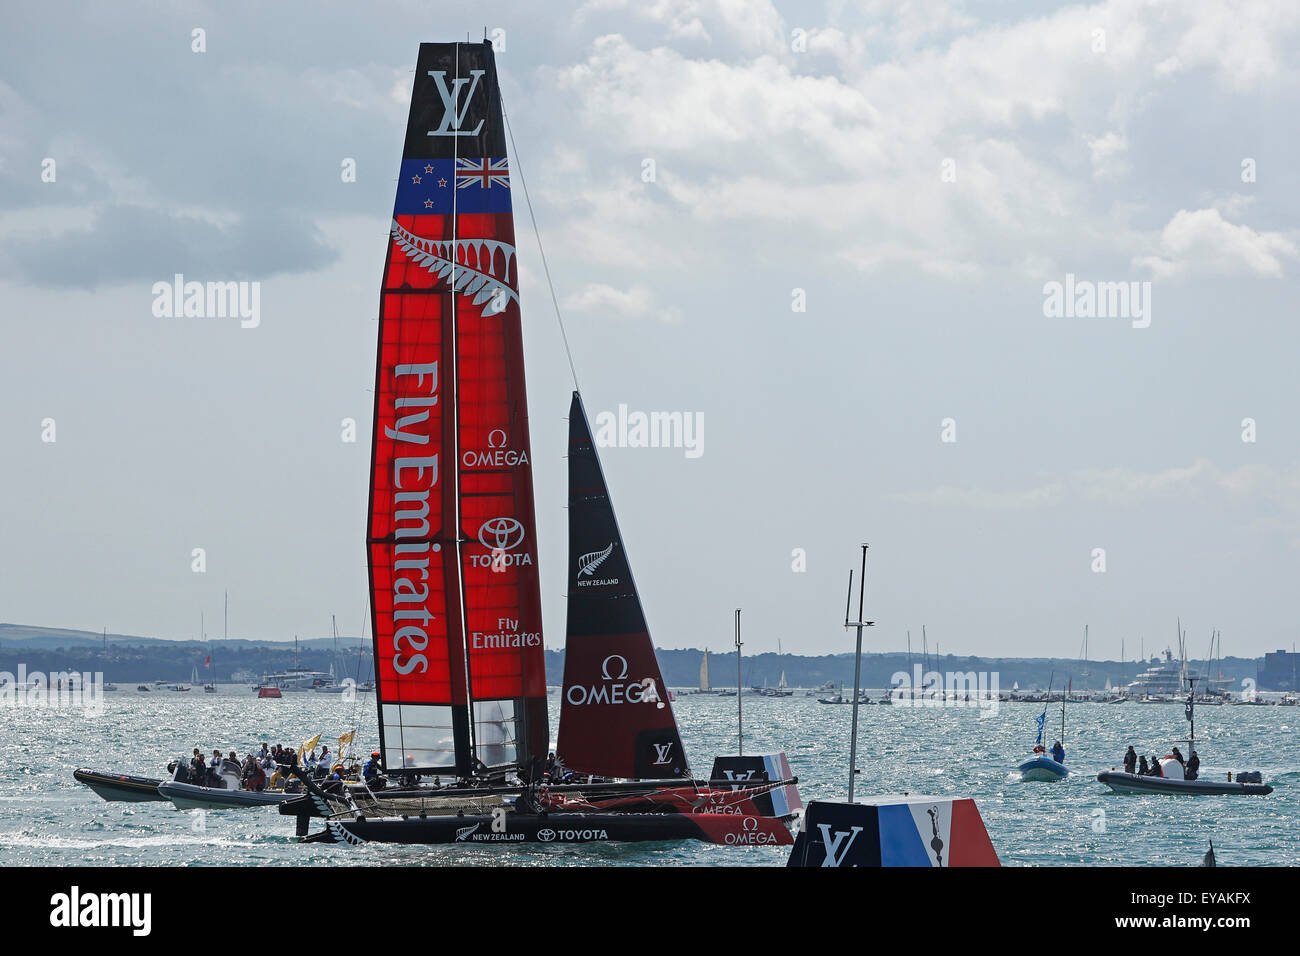 Portsmouth, UK. 25th July, 2015. Emirates New Zealand wins the second race of the 35th America's Cup World Series Races at Portsmouth in Hampshire, UK Saturday July 25, 2015. The 2015 Portsmouth racing of the Louis Vuitton America's Cup World Series counts towards the qualifiers and playoffs which determine the challenger to compete against the title holders Oracle Team USA in 2017. Credit:  Luke MacGregor/Alamy Live News Stock Photo